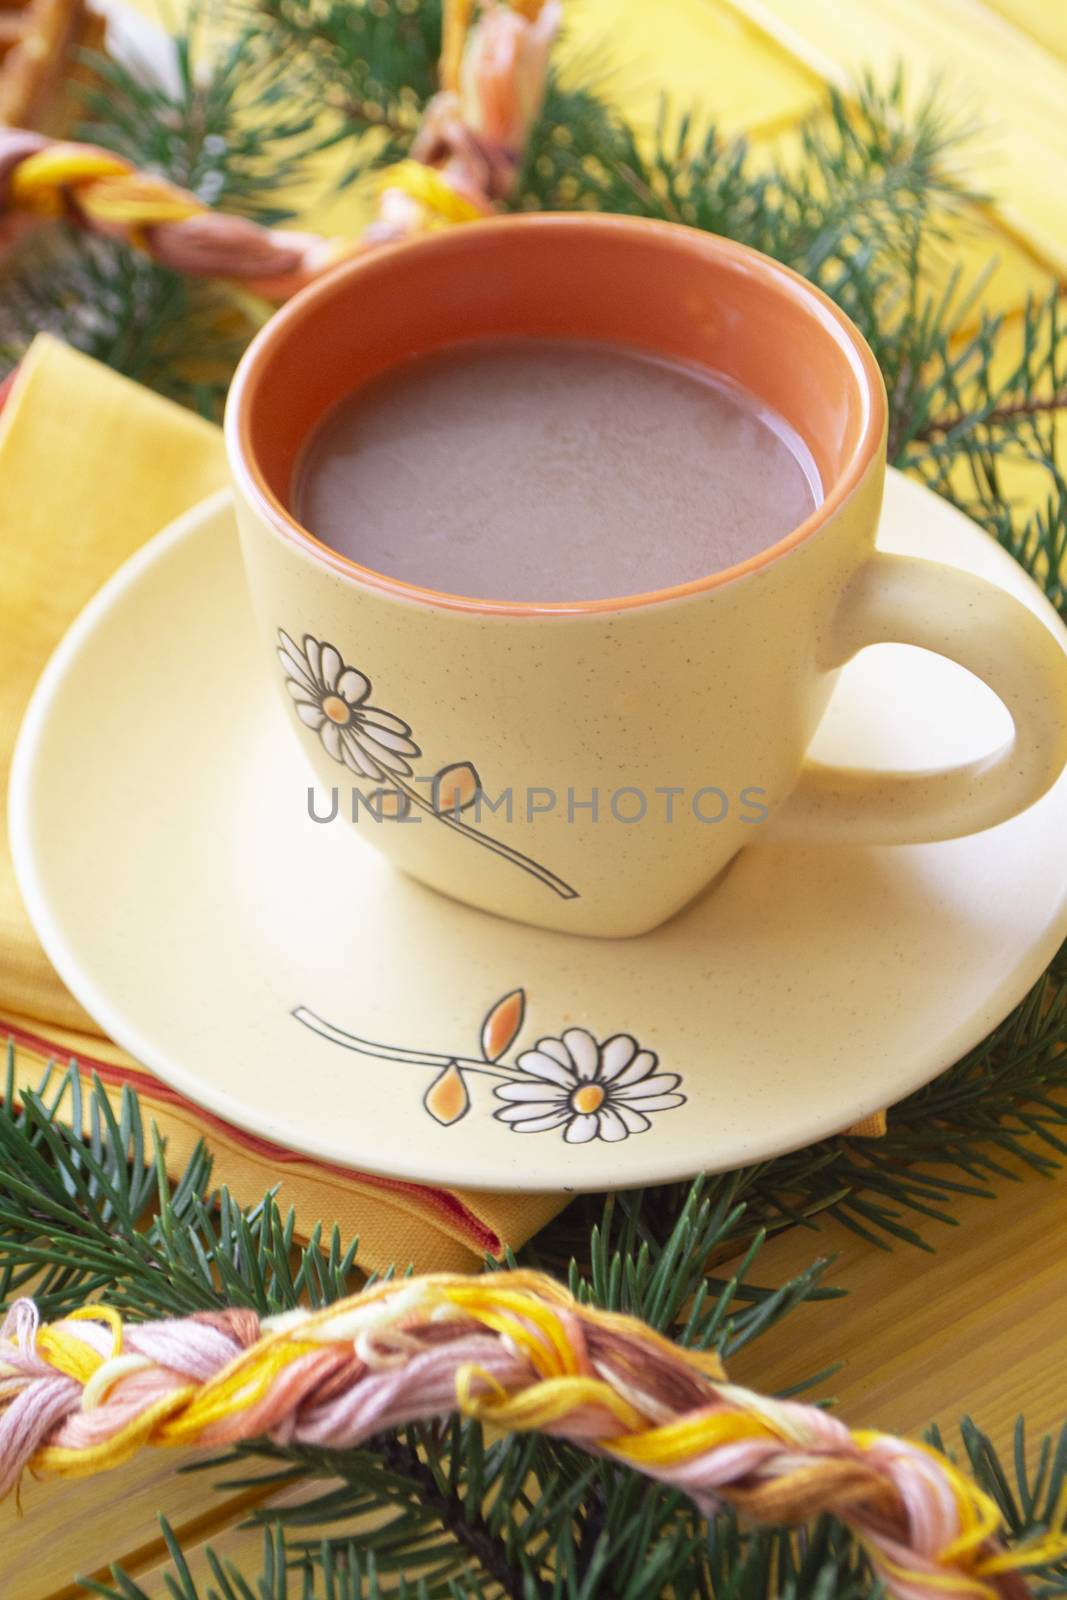 Christmas hot chocolate in a orange cup on orange wooden board. Vertical image